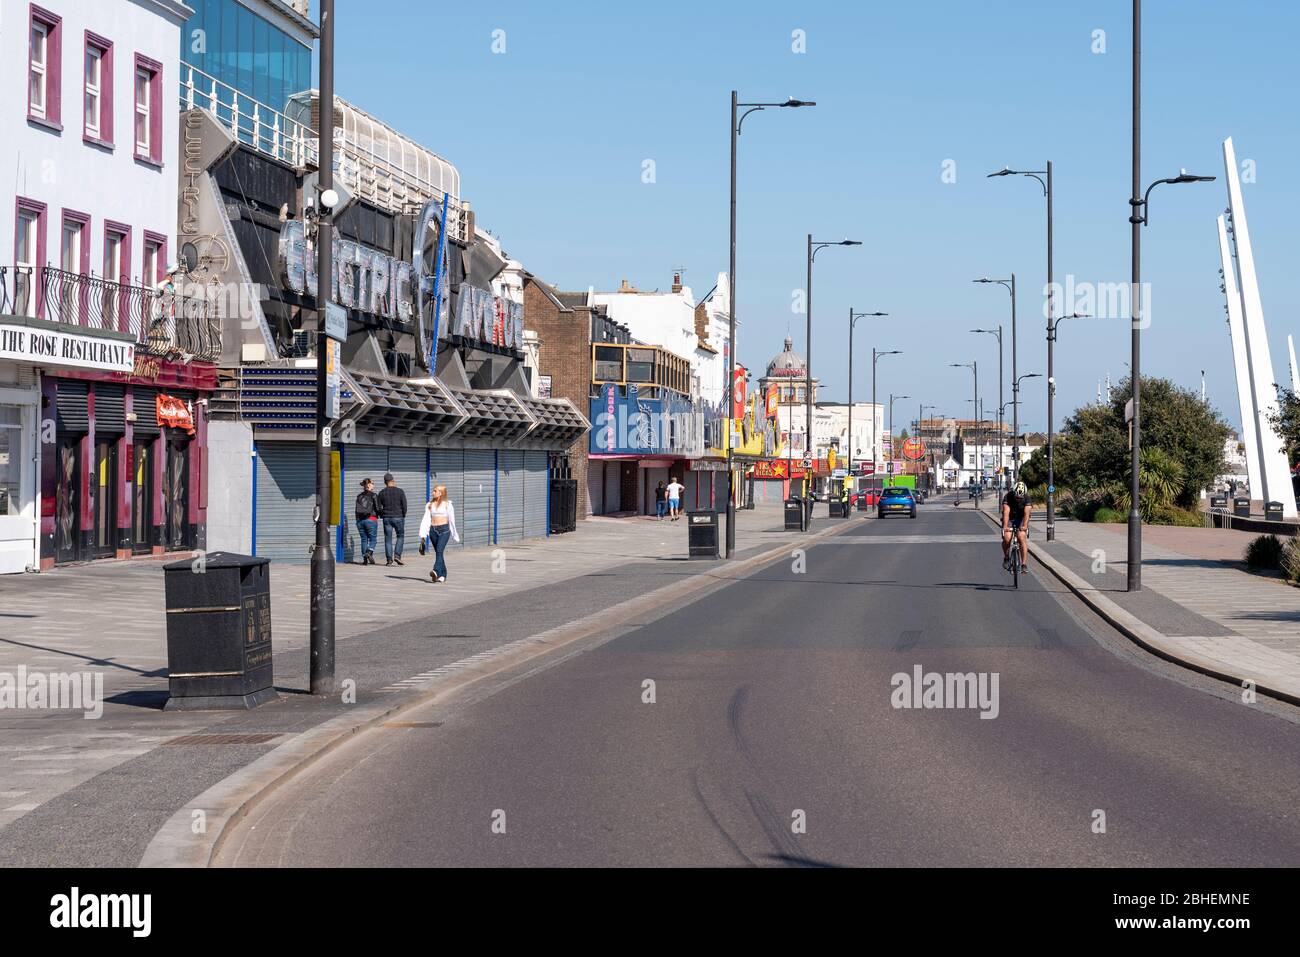 Southend on Sea, Essex, UK. 25th Apr, 2020. A few people are out enjoying the warm sunny weekend day in Southend on Sea but are largely obeying the request to stay home during the COVID-19 Coronavirus pandemic lockdown period. Those that are out are keeping to the social distancing guidelines Stock Photo